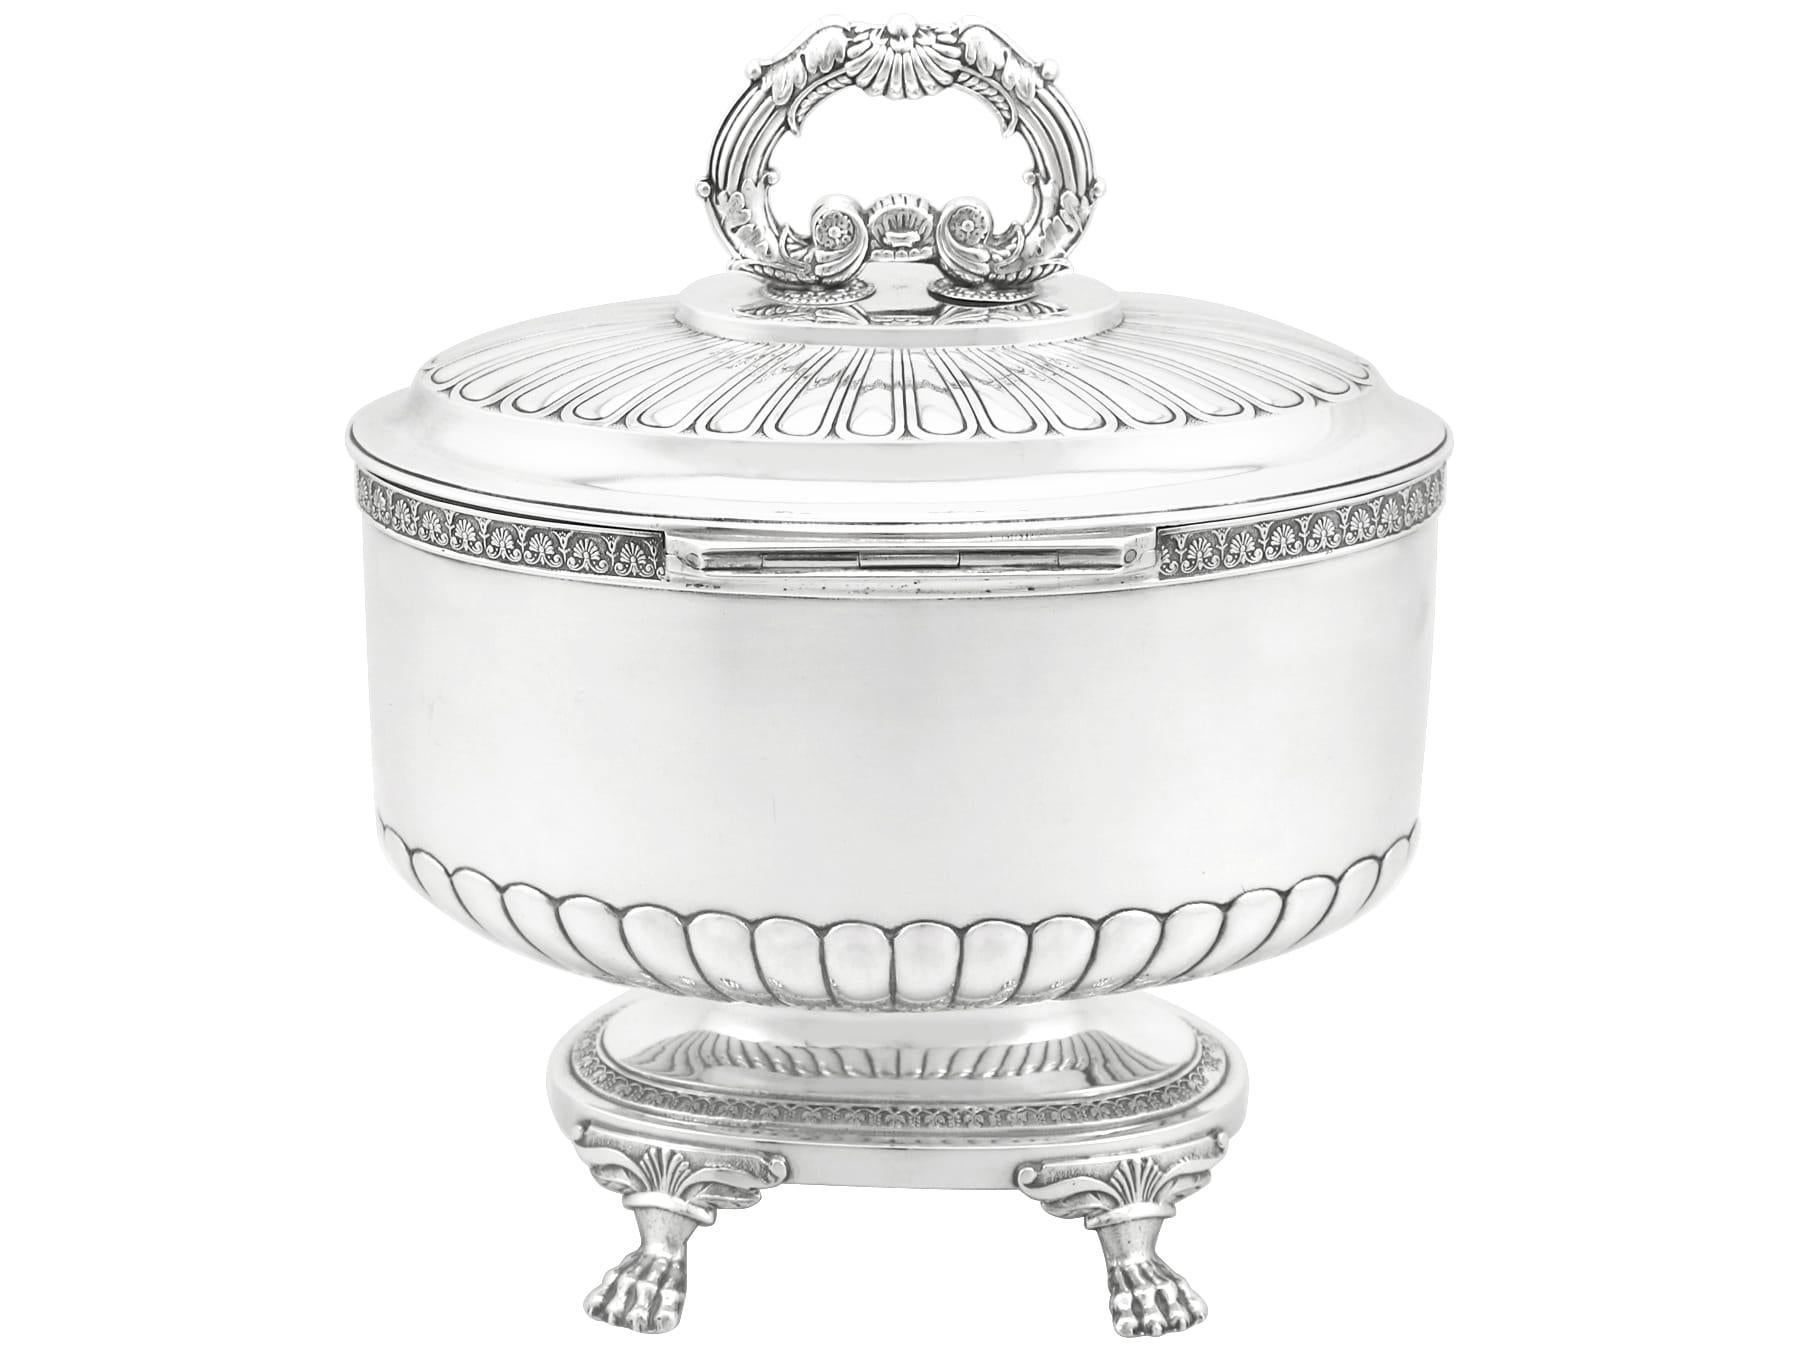 19th Century Antique 1845 Sterling Silver Locking Biscuit Box For Sale 1